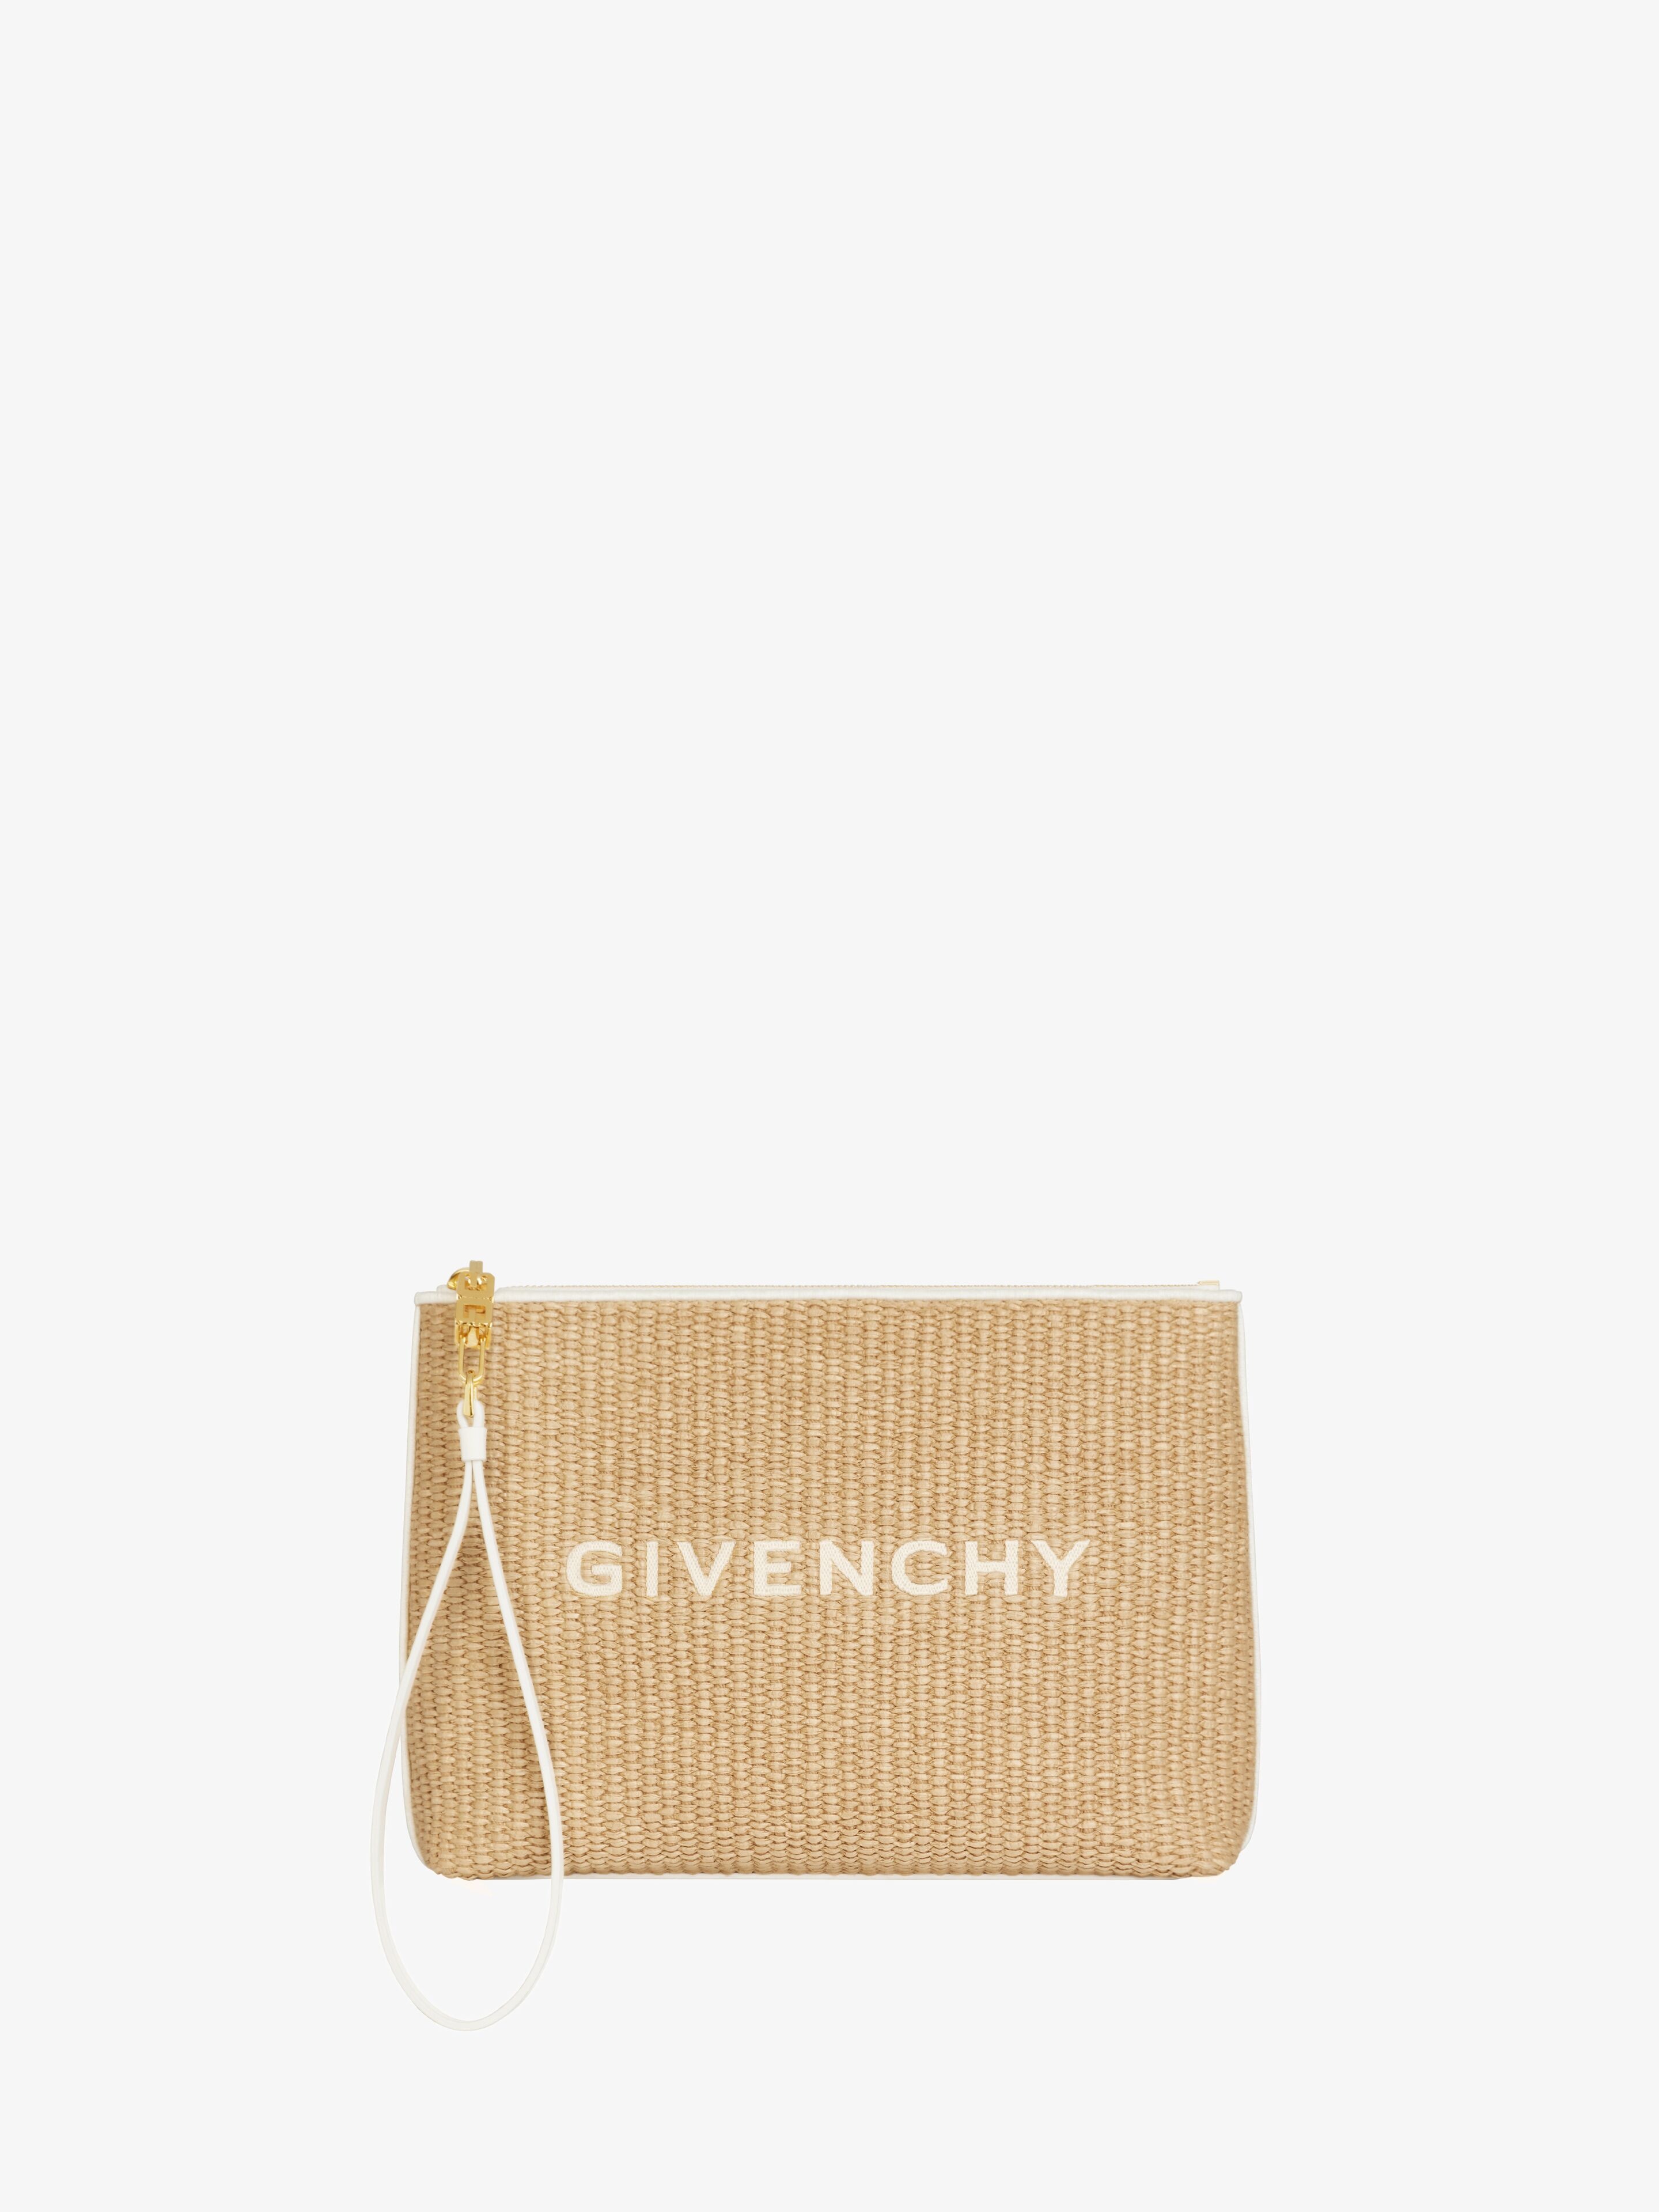 GIVENCHY TRAVEL POUCH IN RAFFIA - 1